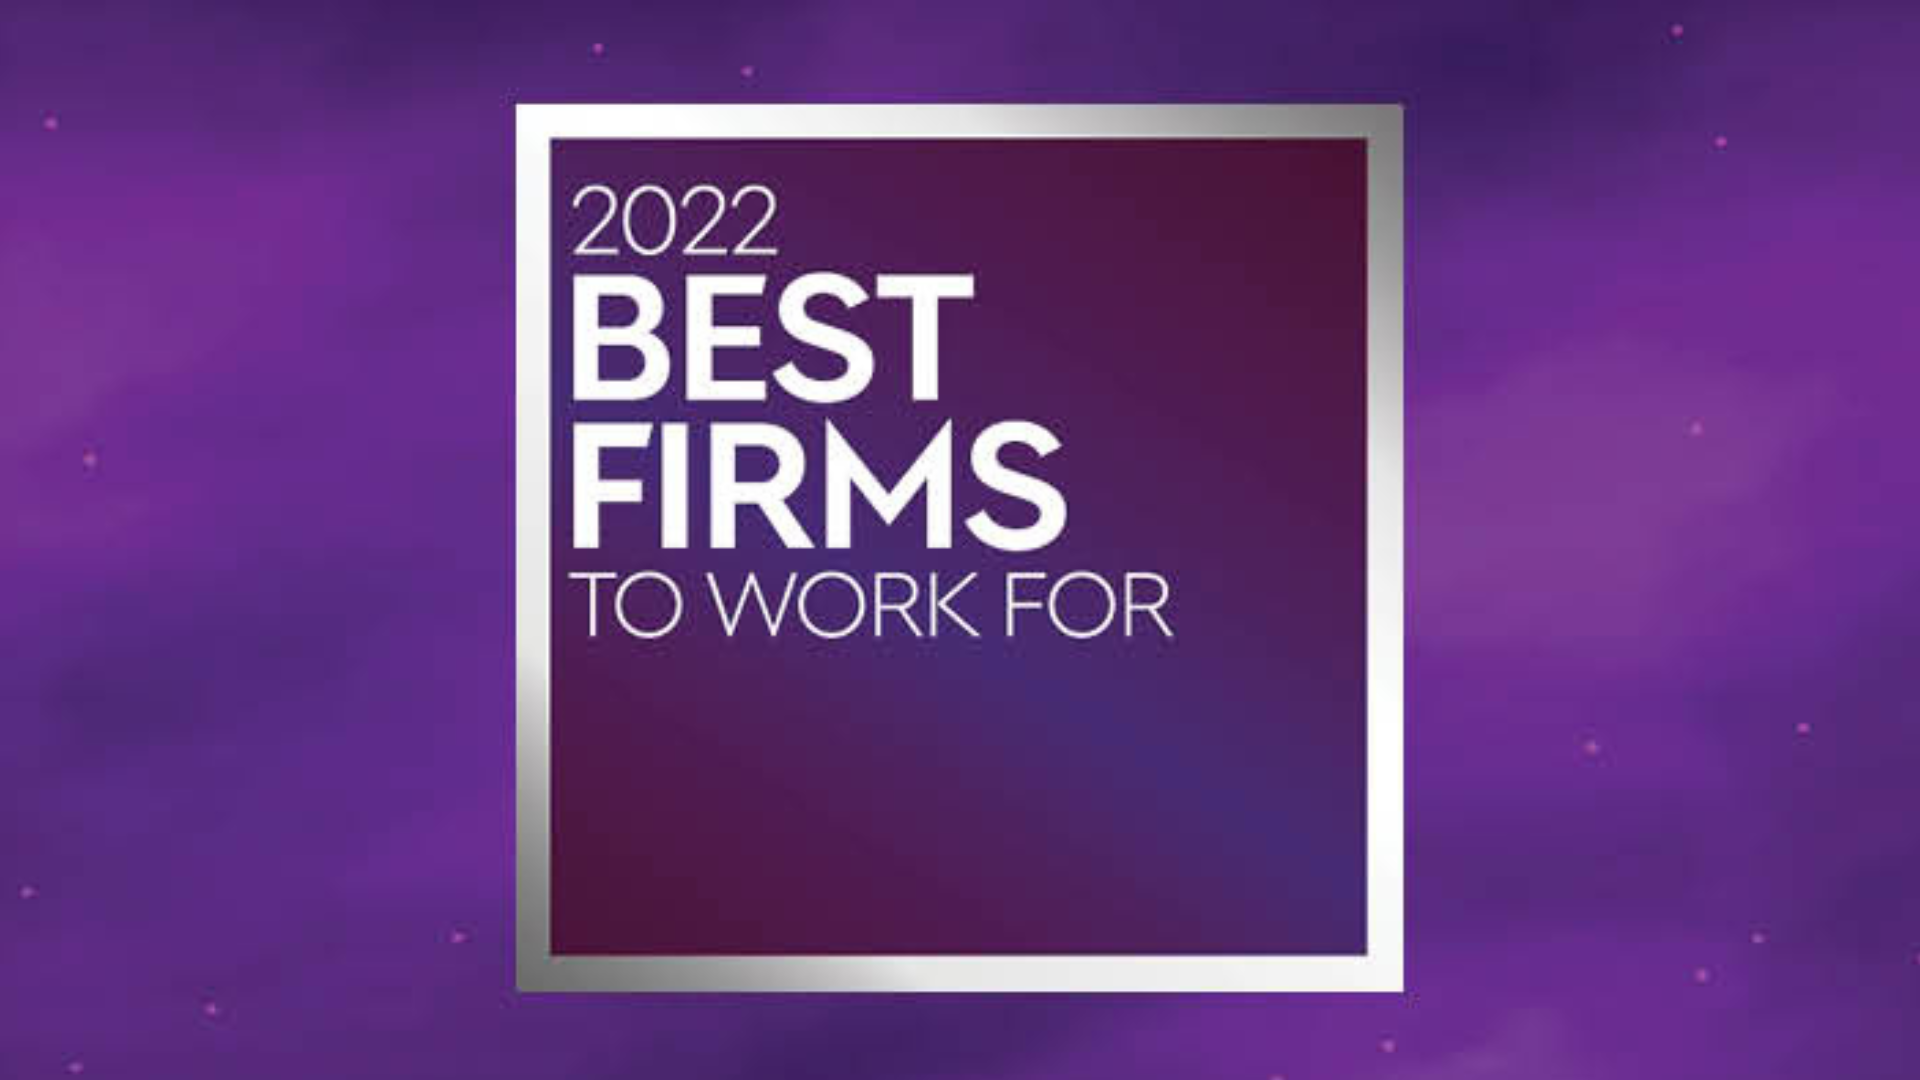 The Best Firms to Work For: The 2022 Honorees